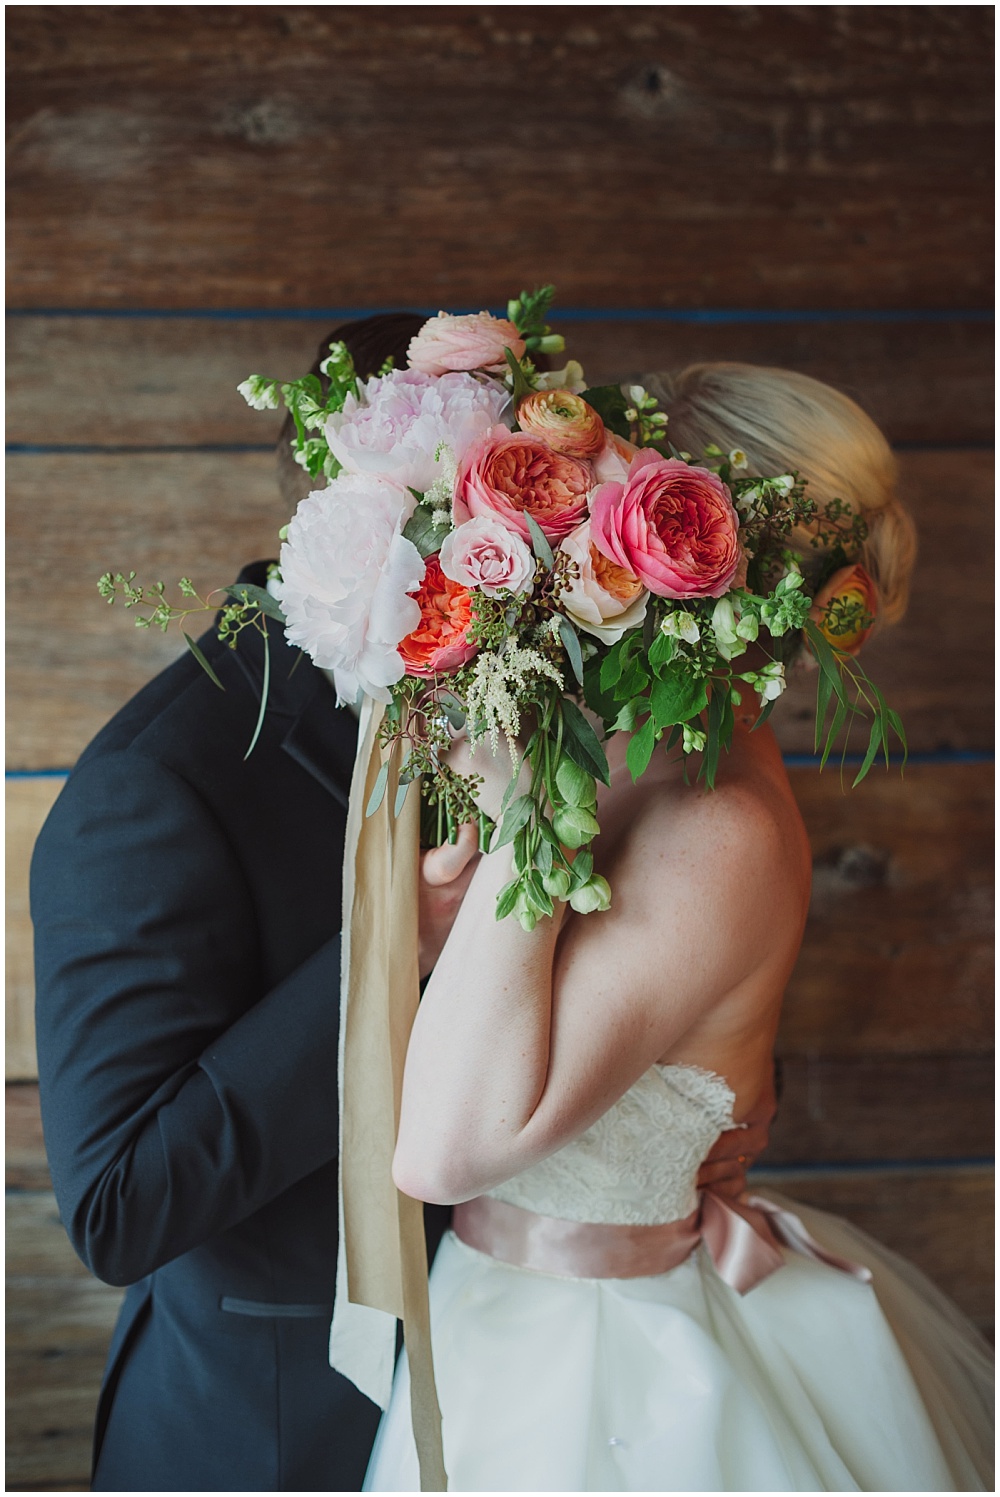 Bride and Groom with blush, pink and green bridal bouquet and silk ribbon | Ritz Charles Garden Pavilion Wedding by Stacy Able Photography & Jessica Dum Wedding Coordination